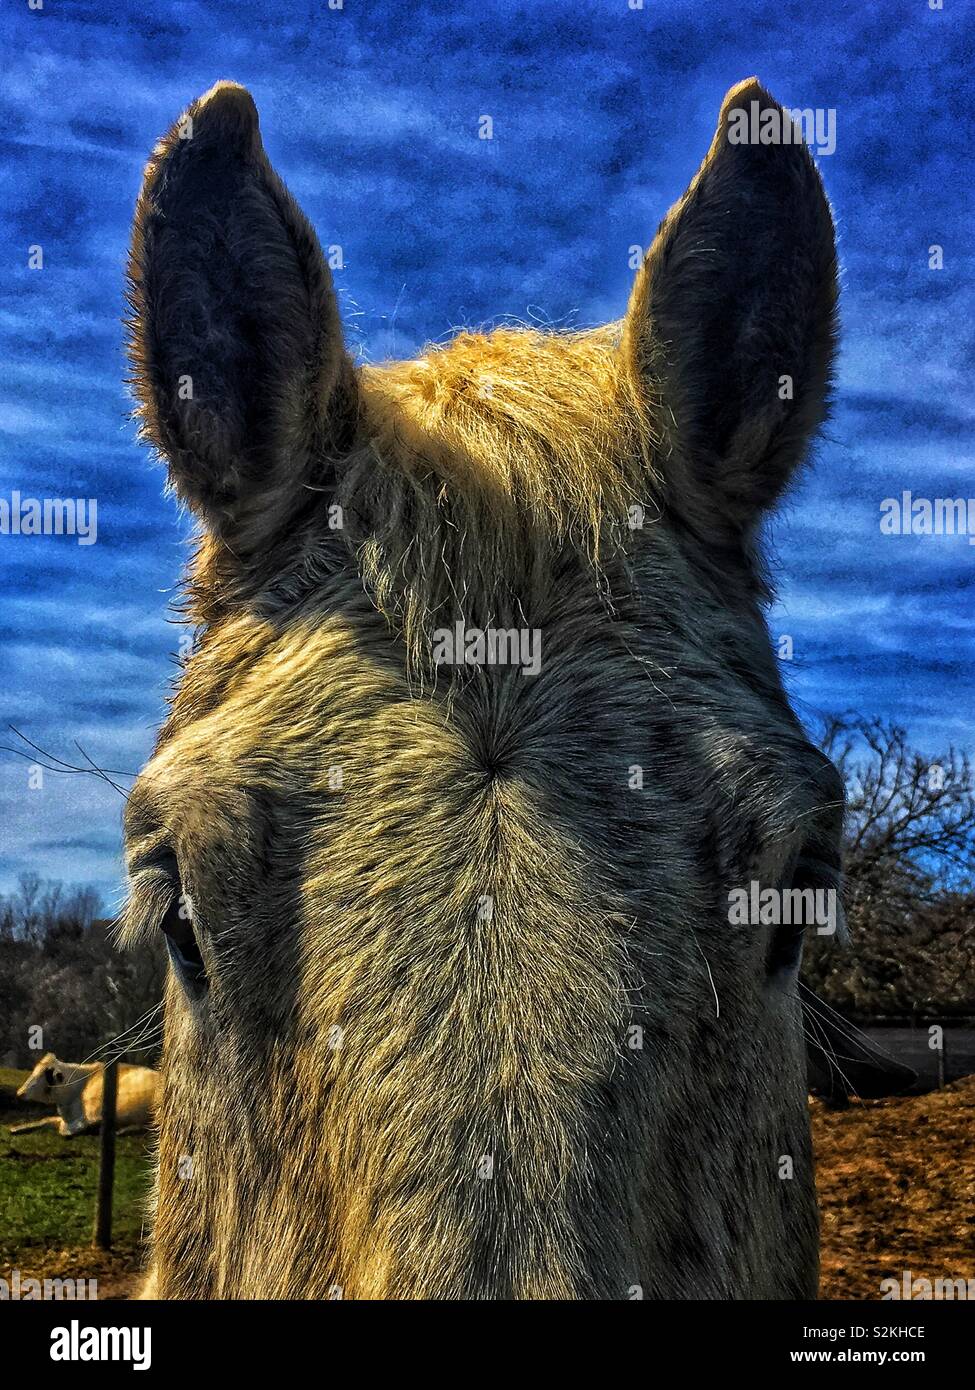 Forehead, face, and ears of a working farm horse facing the camera. Stock Photo